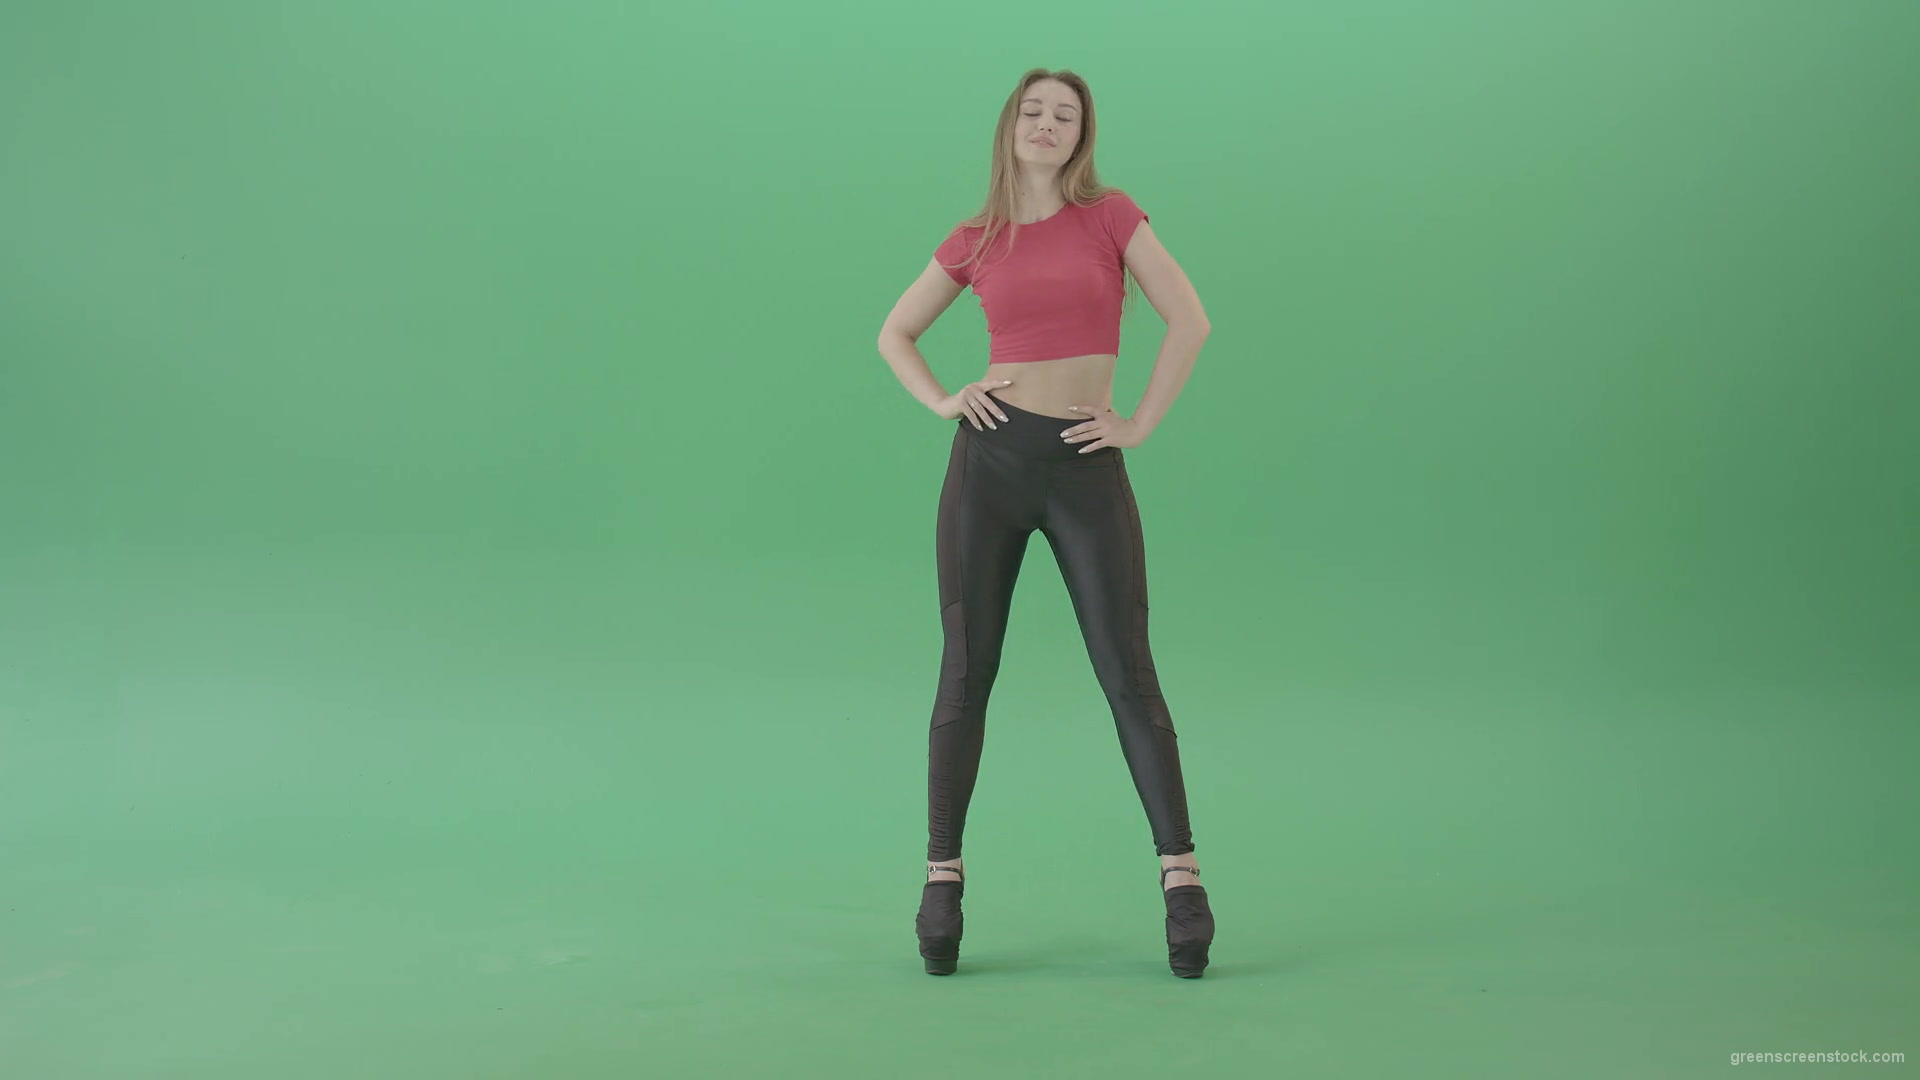 Advertising-Girl-posing-in-front-view-full-size-on-green-screen-4K-Video-Footage-1920_007 Green Screen Stock